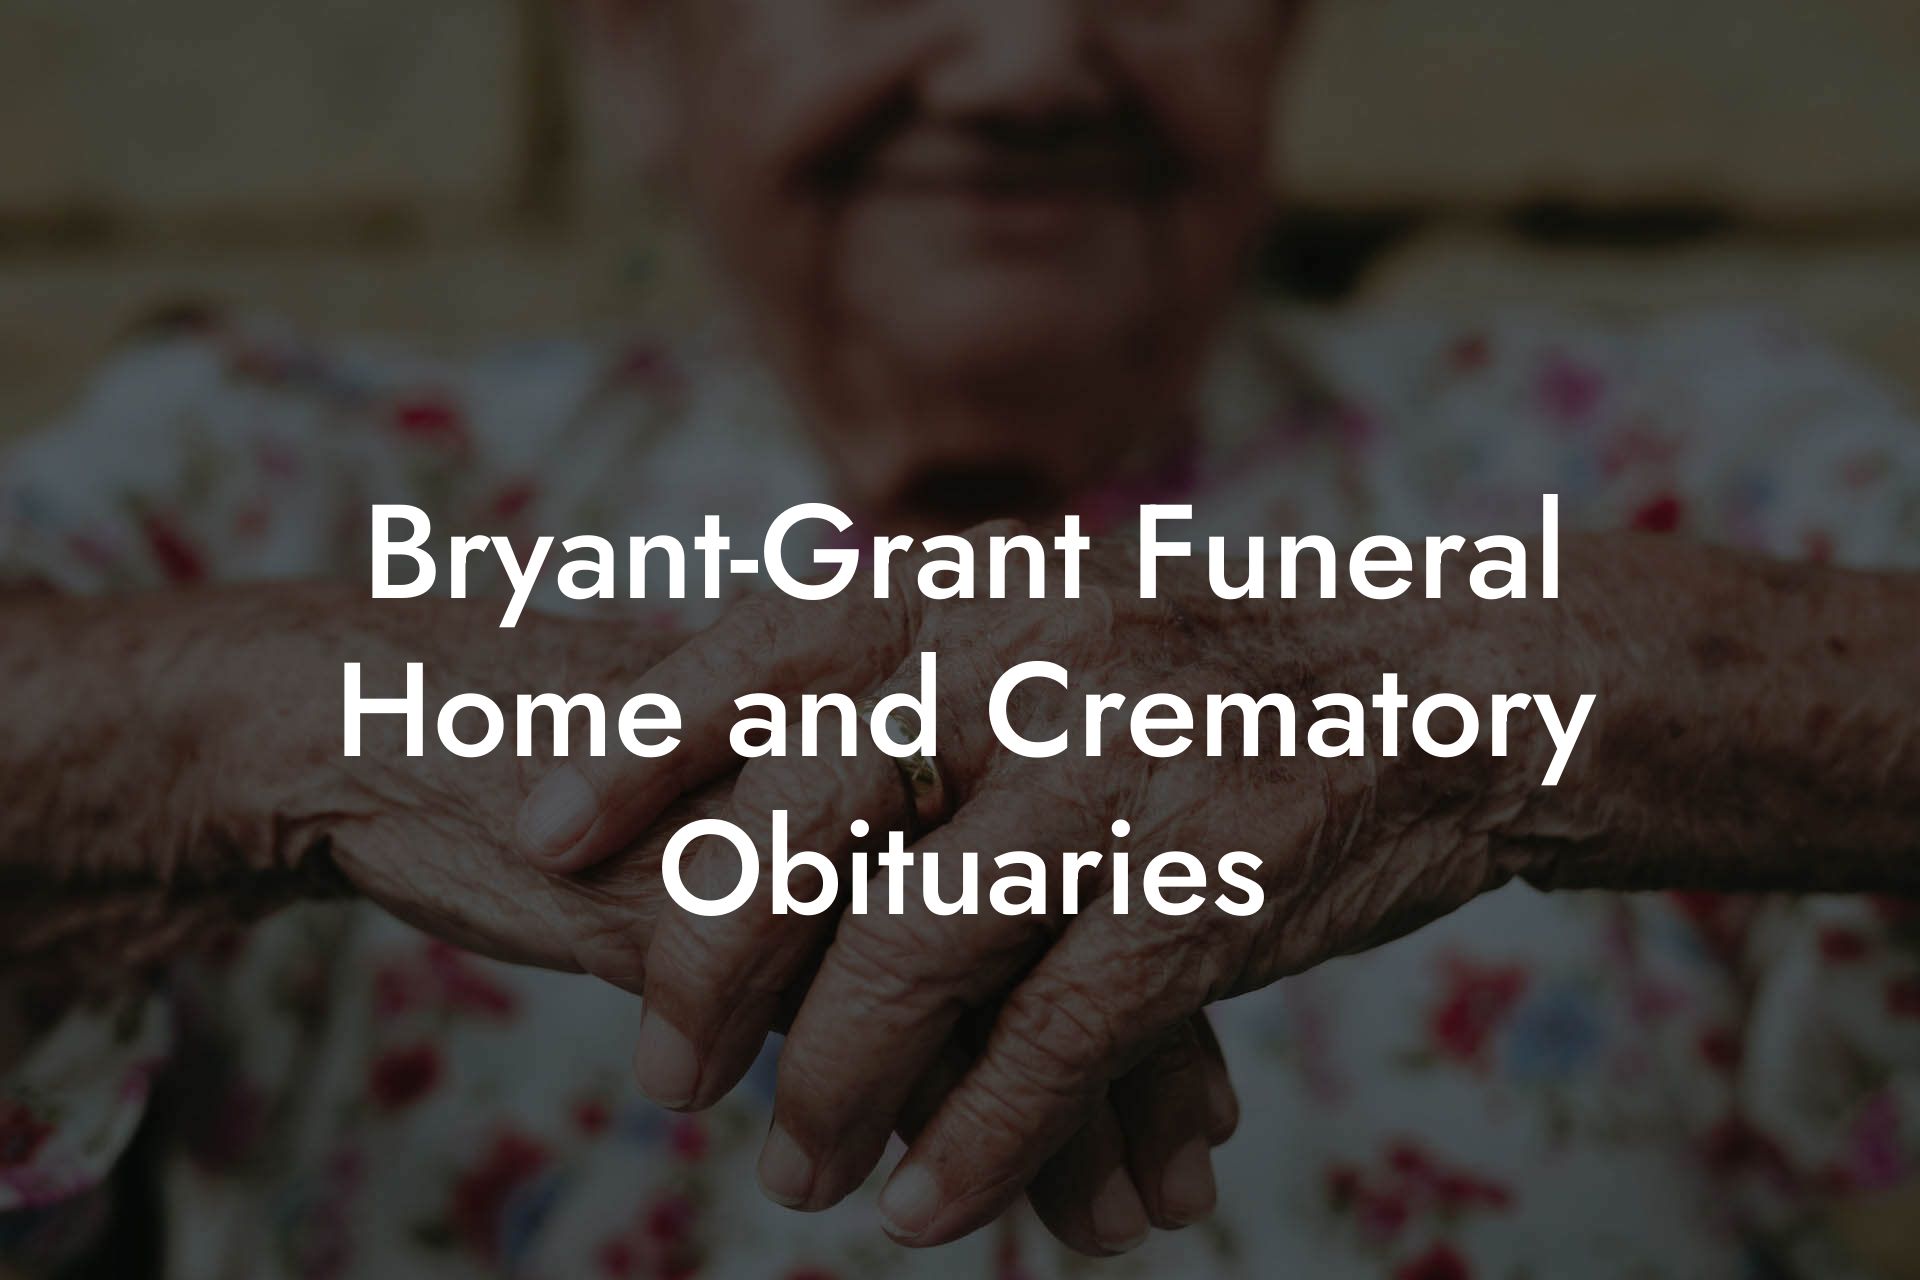 Bryant-Grant Funeral Home and Crematory Obituaries